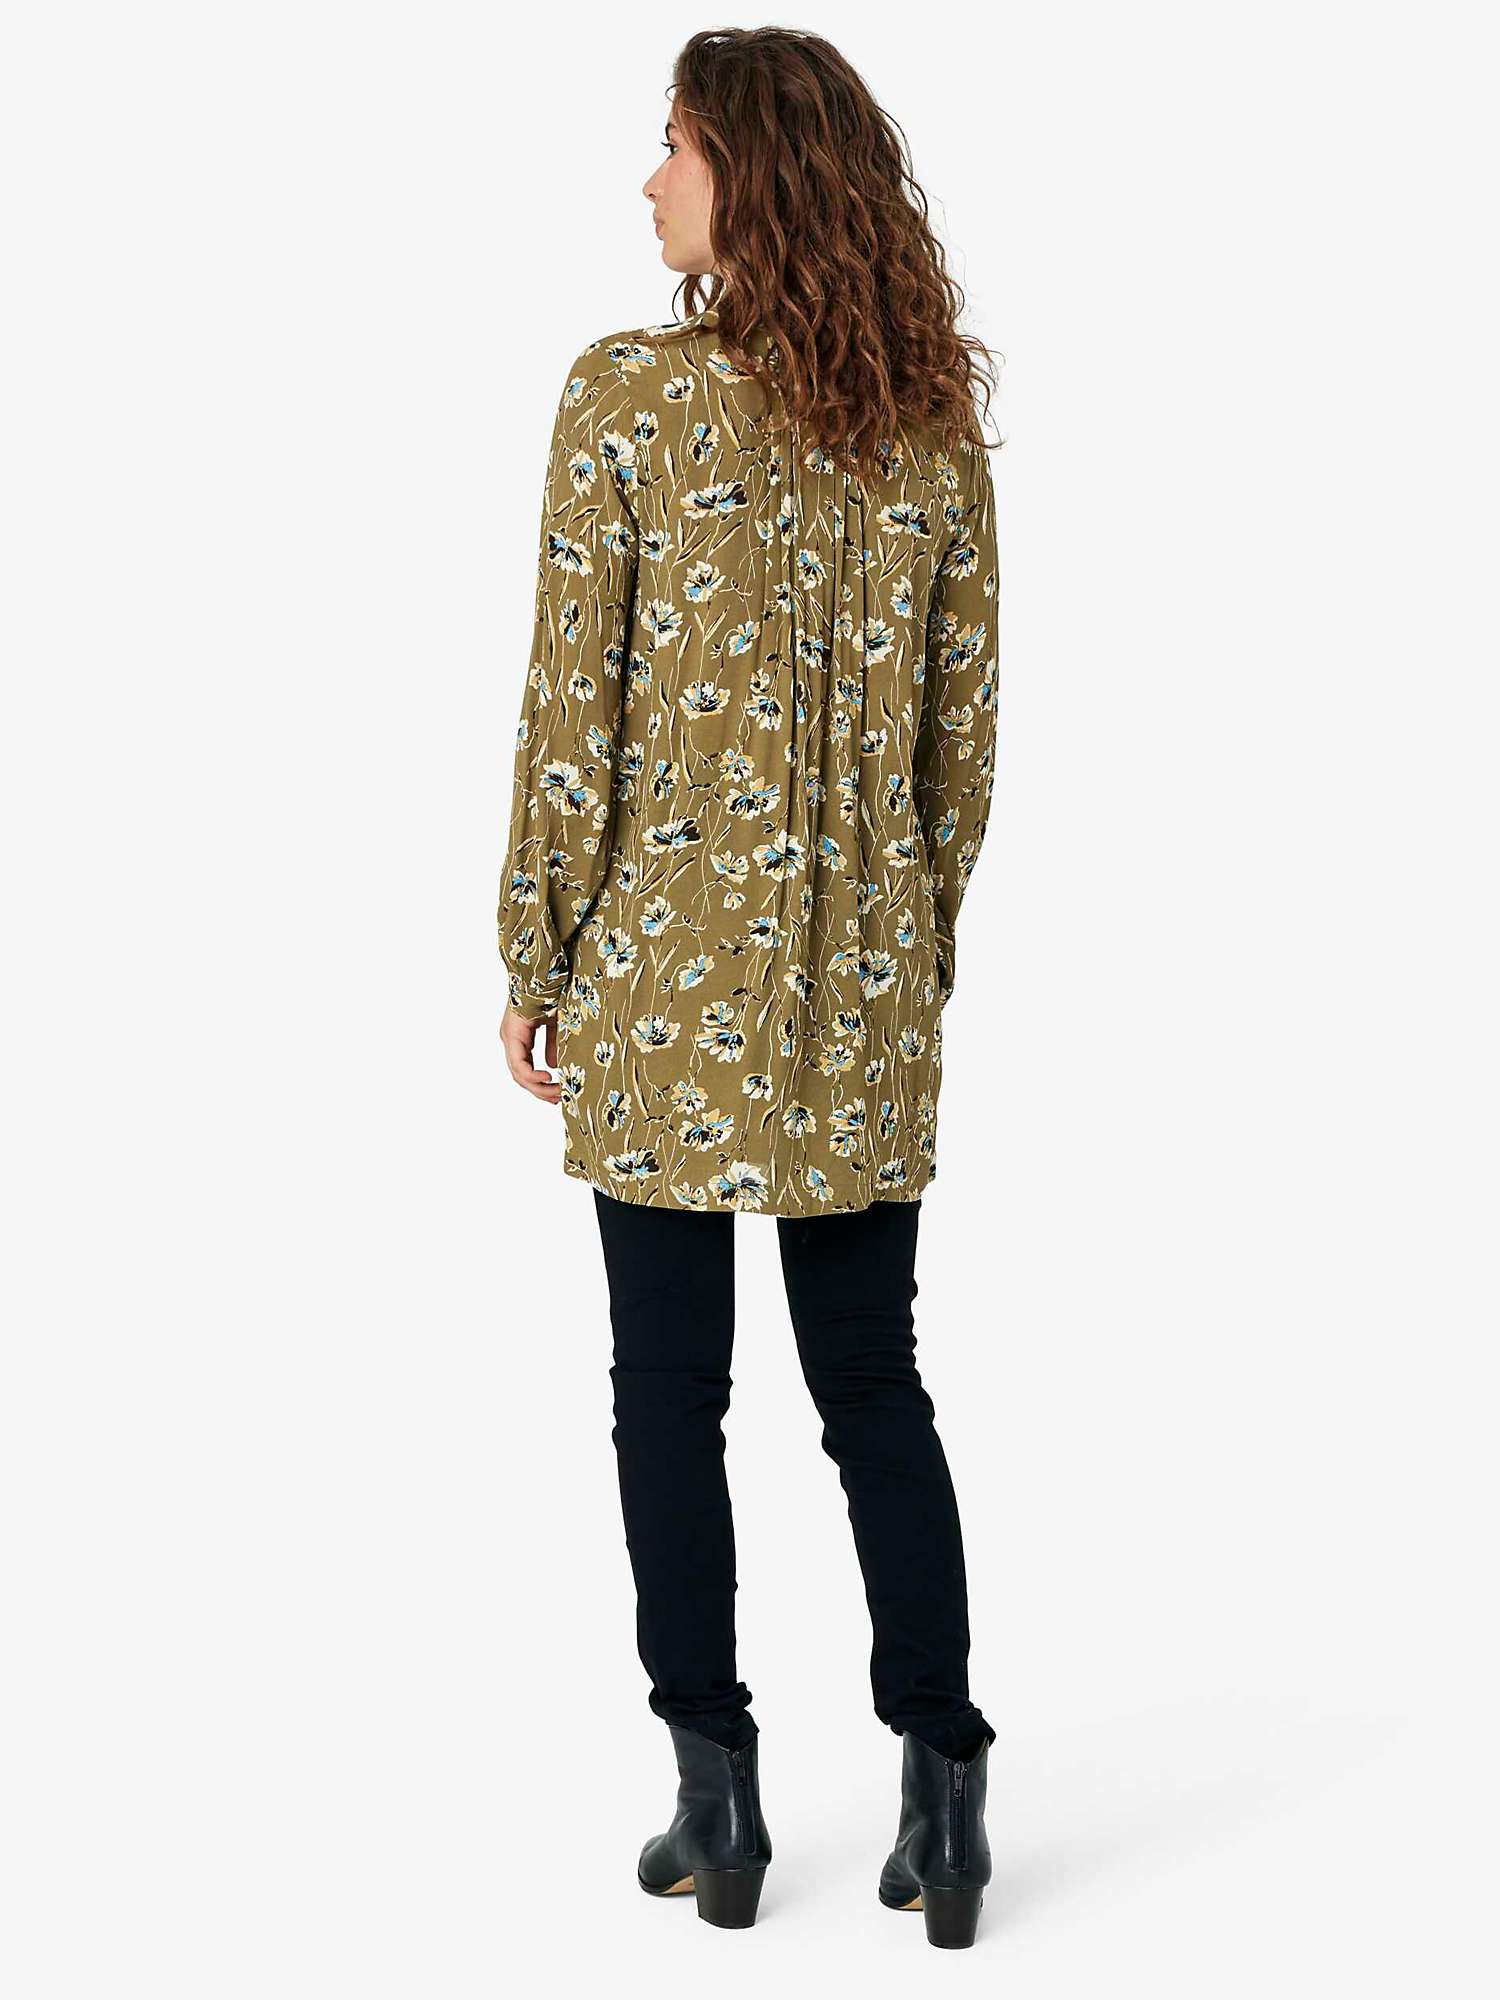 Buy Noa Noa Tiffany Floral Print Longline Tunic Top, Green/White Online at johnlewis.com